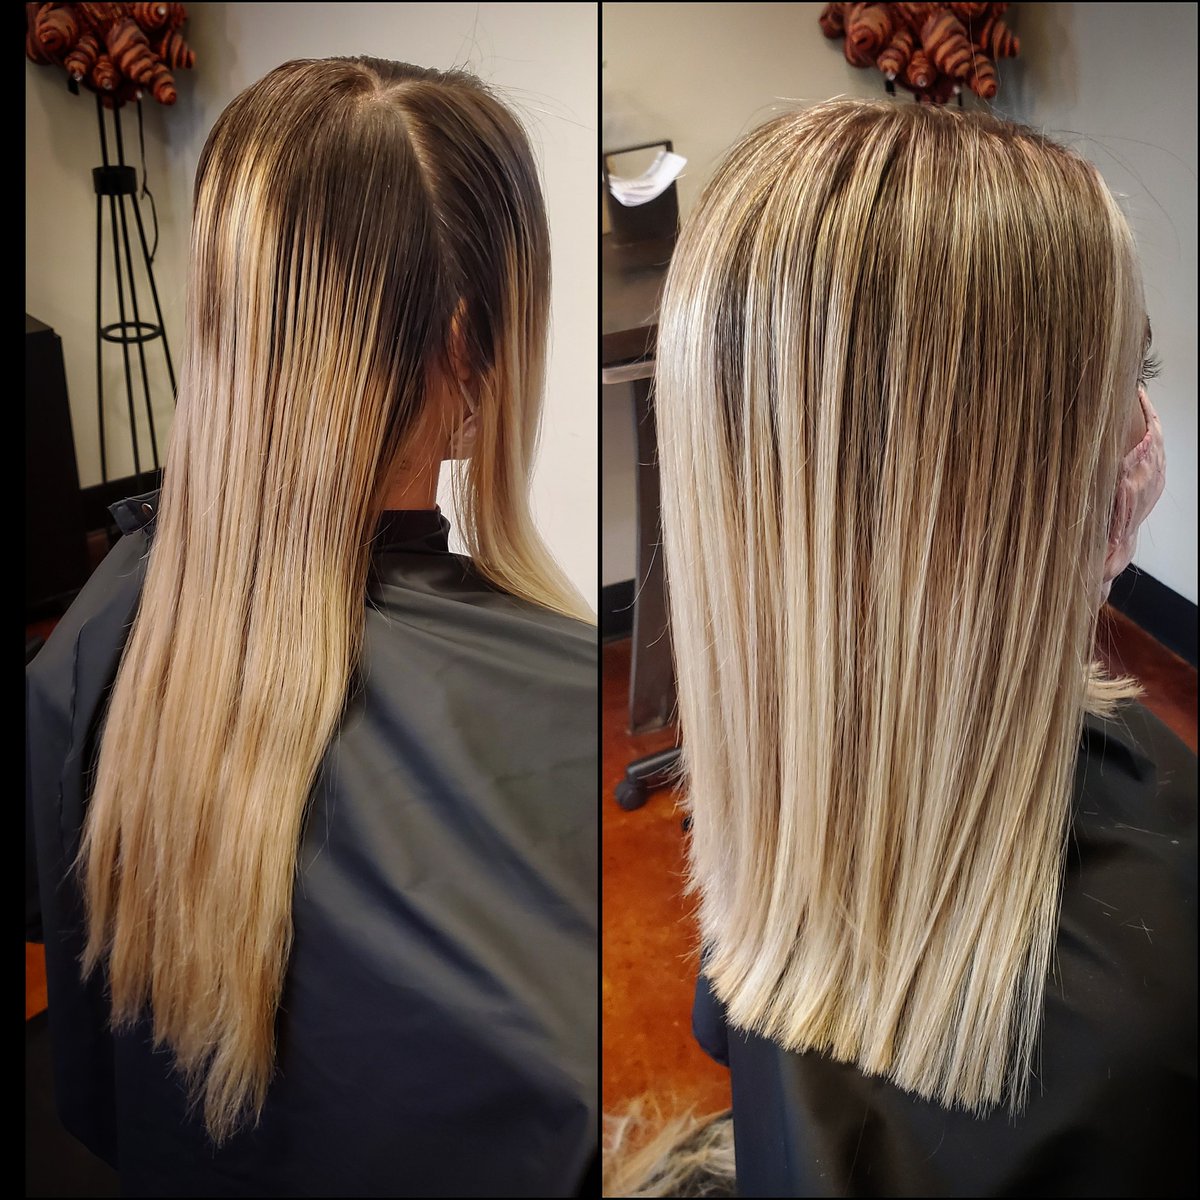 B E F O R E & A F T E R

Holy marathon foils 😅 babylighted this pretty girl to break up that regrowth 👀

#babylights #aveda #avedastylist #avedablonde